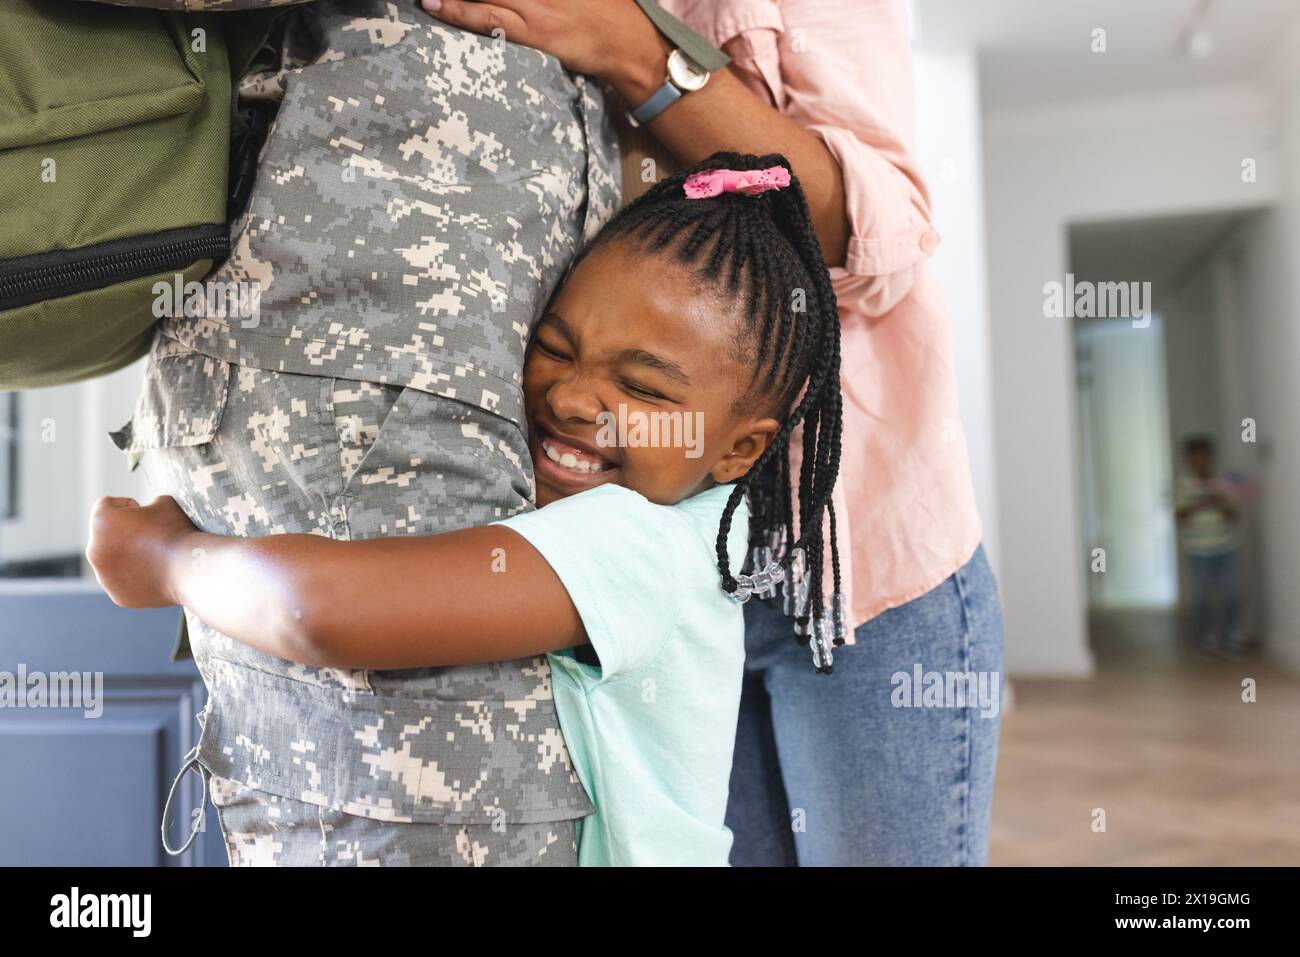 Young African American girl with braided hair hugging soldier at home, showing love Stock Photo